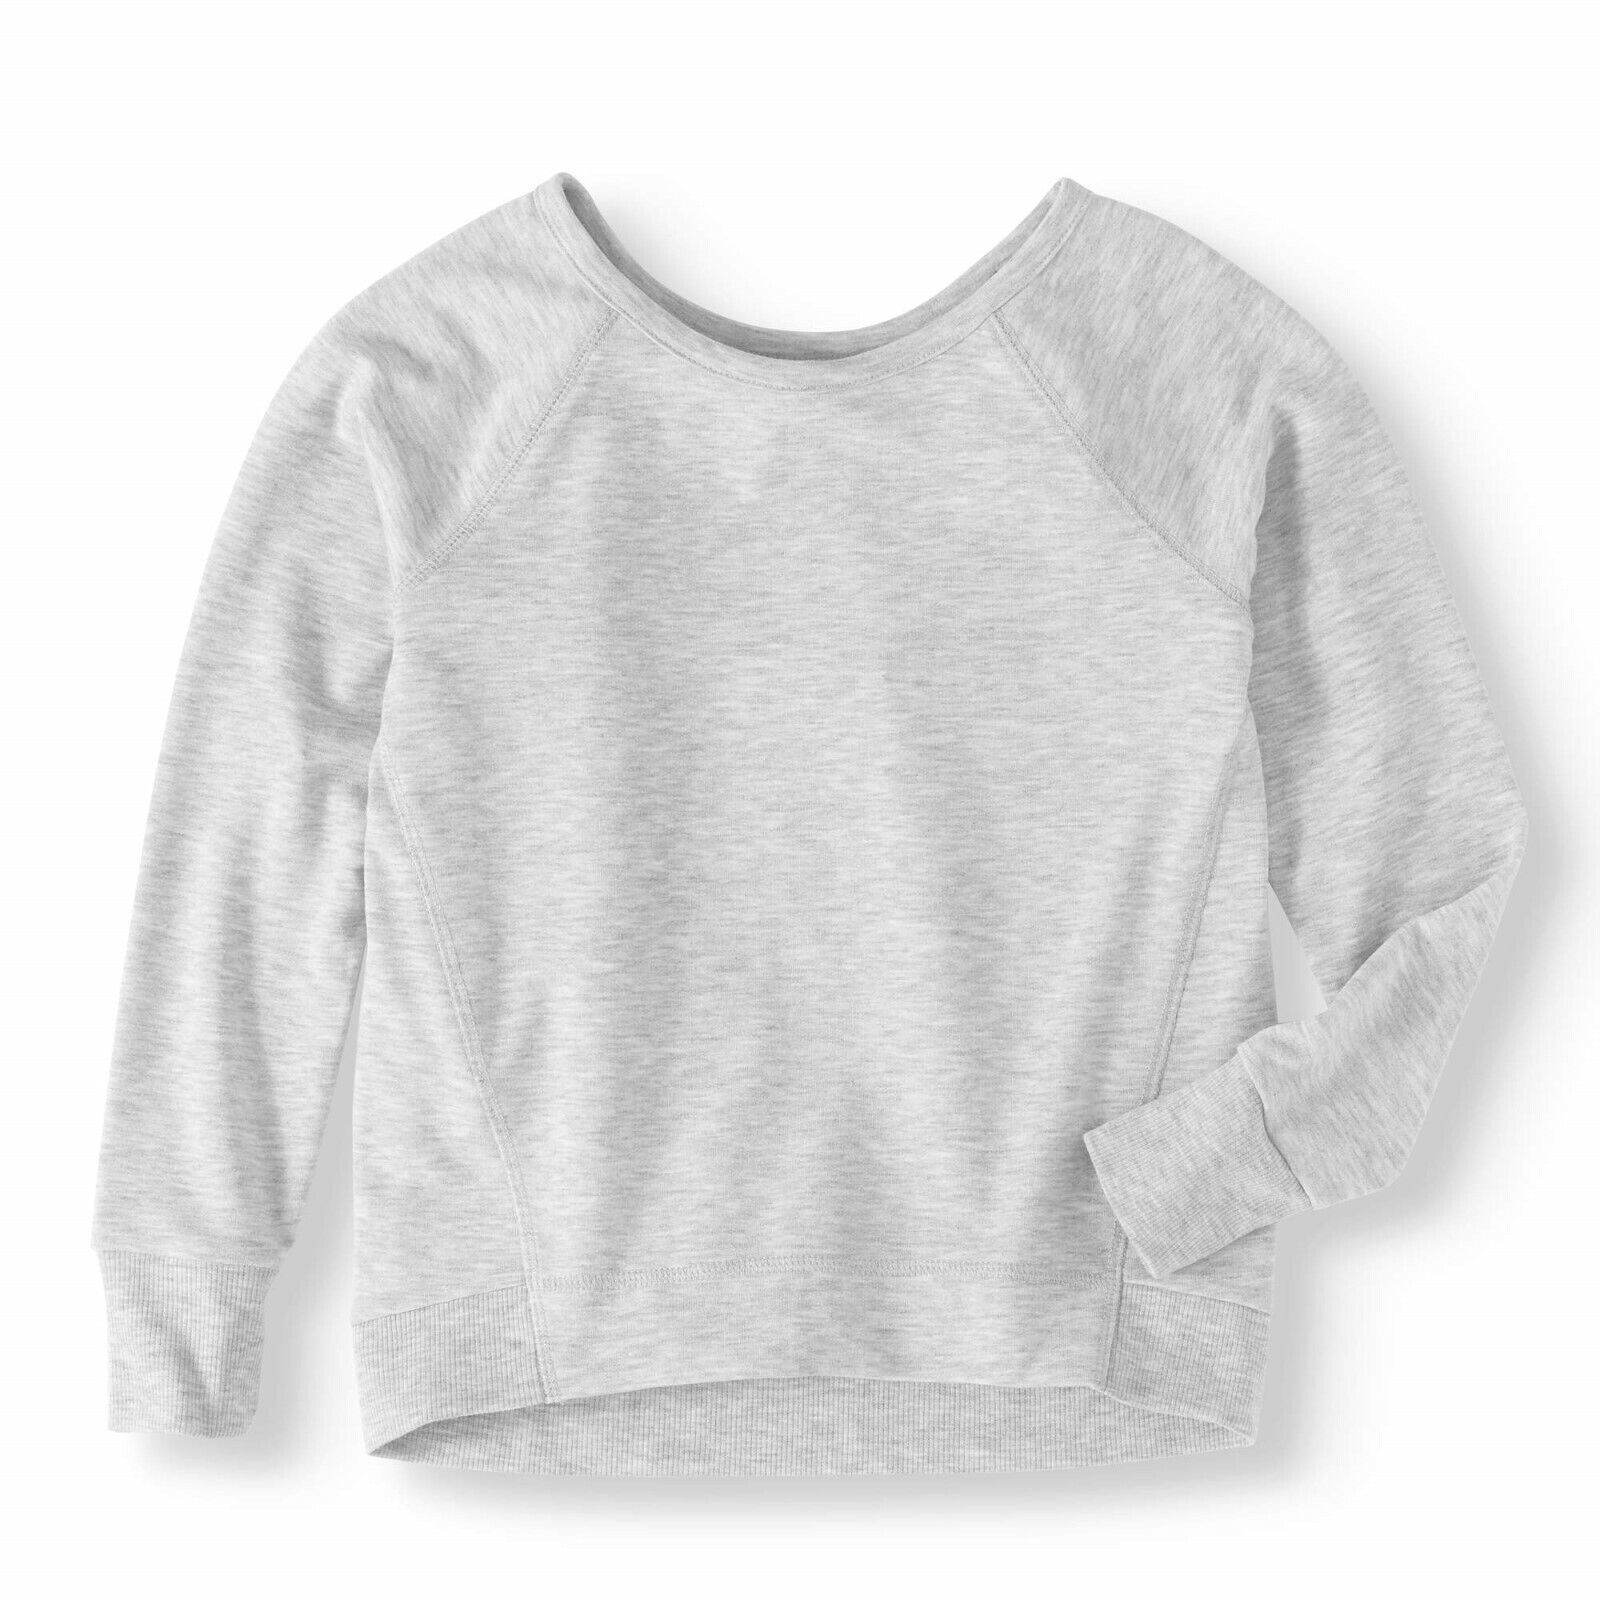 Primary image for Athletic Works Girls French Terry Long Sleeve Shirt Size Small 6-6X Gray